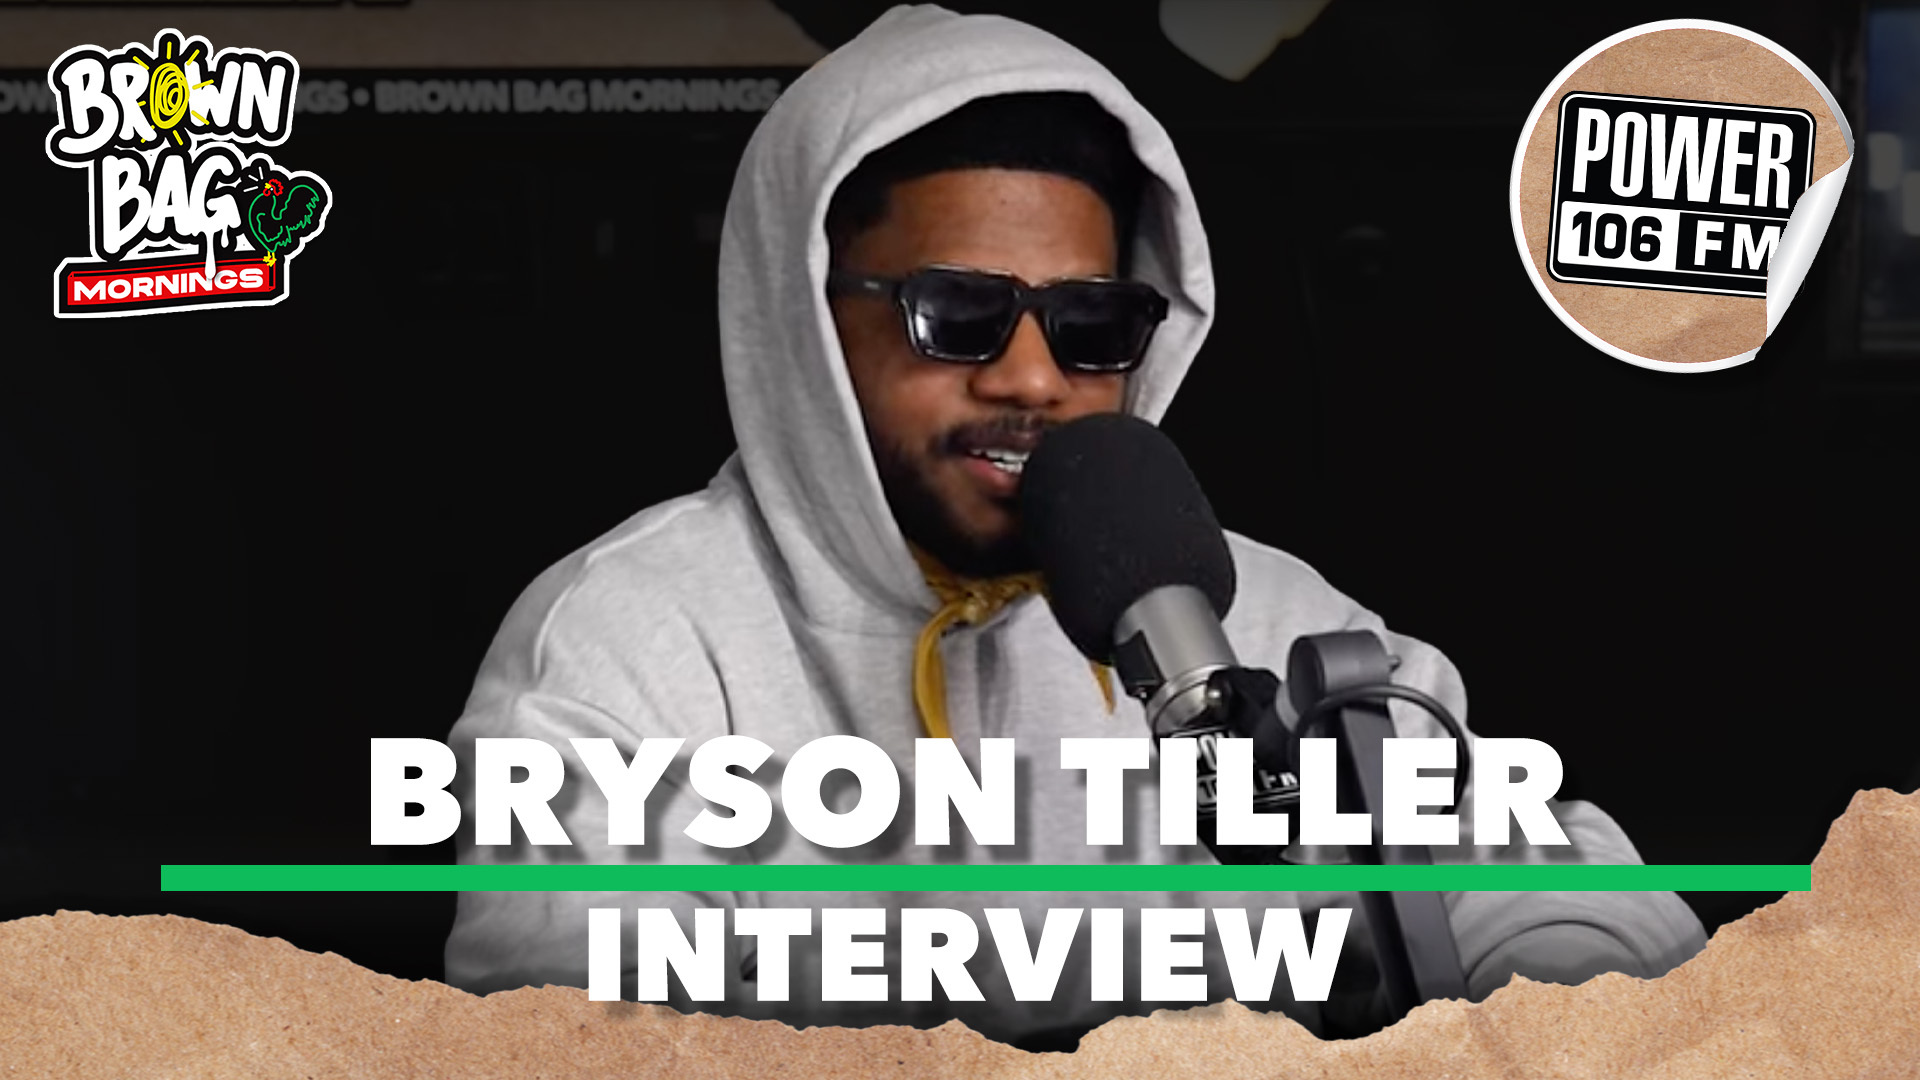 Bryson Tiller Talks Gaming & New Music With Brown Bag Mornings